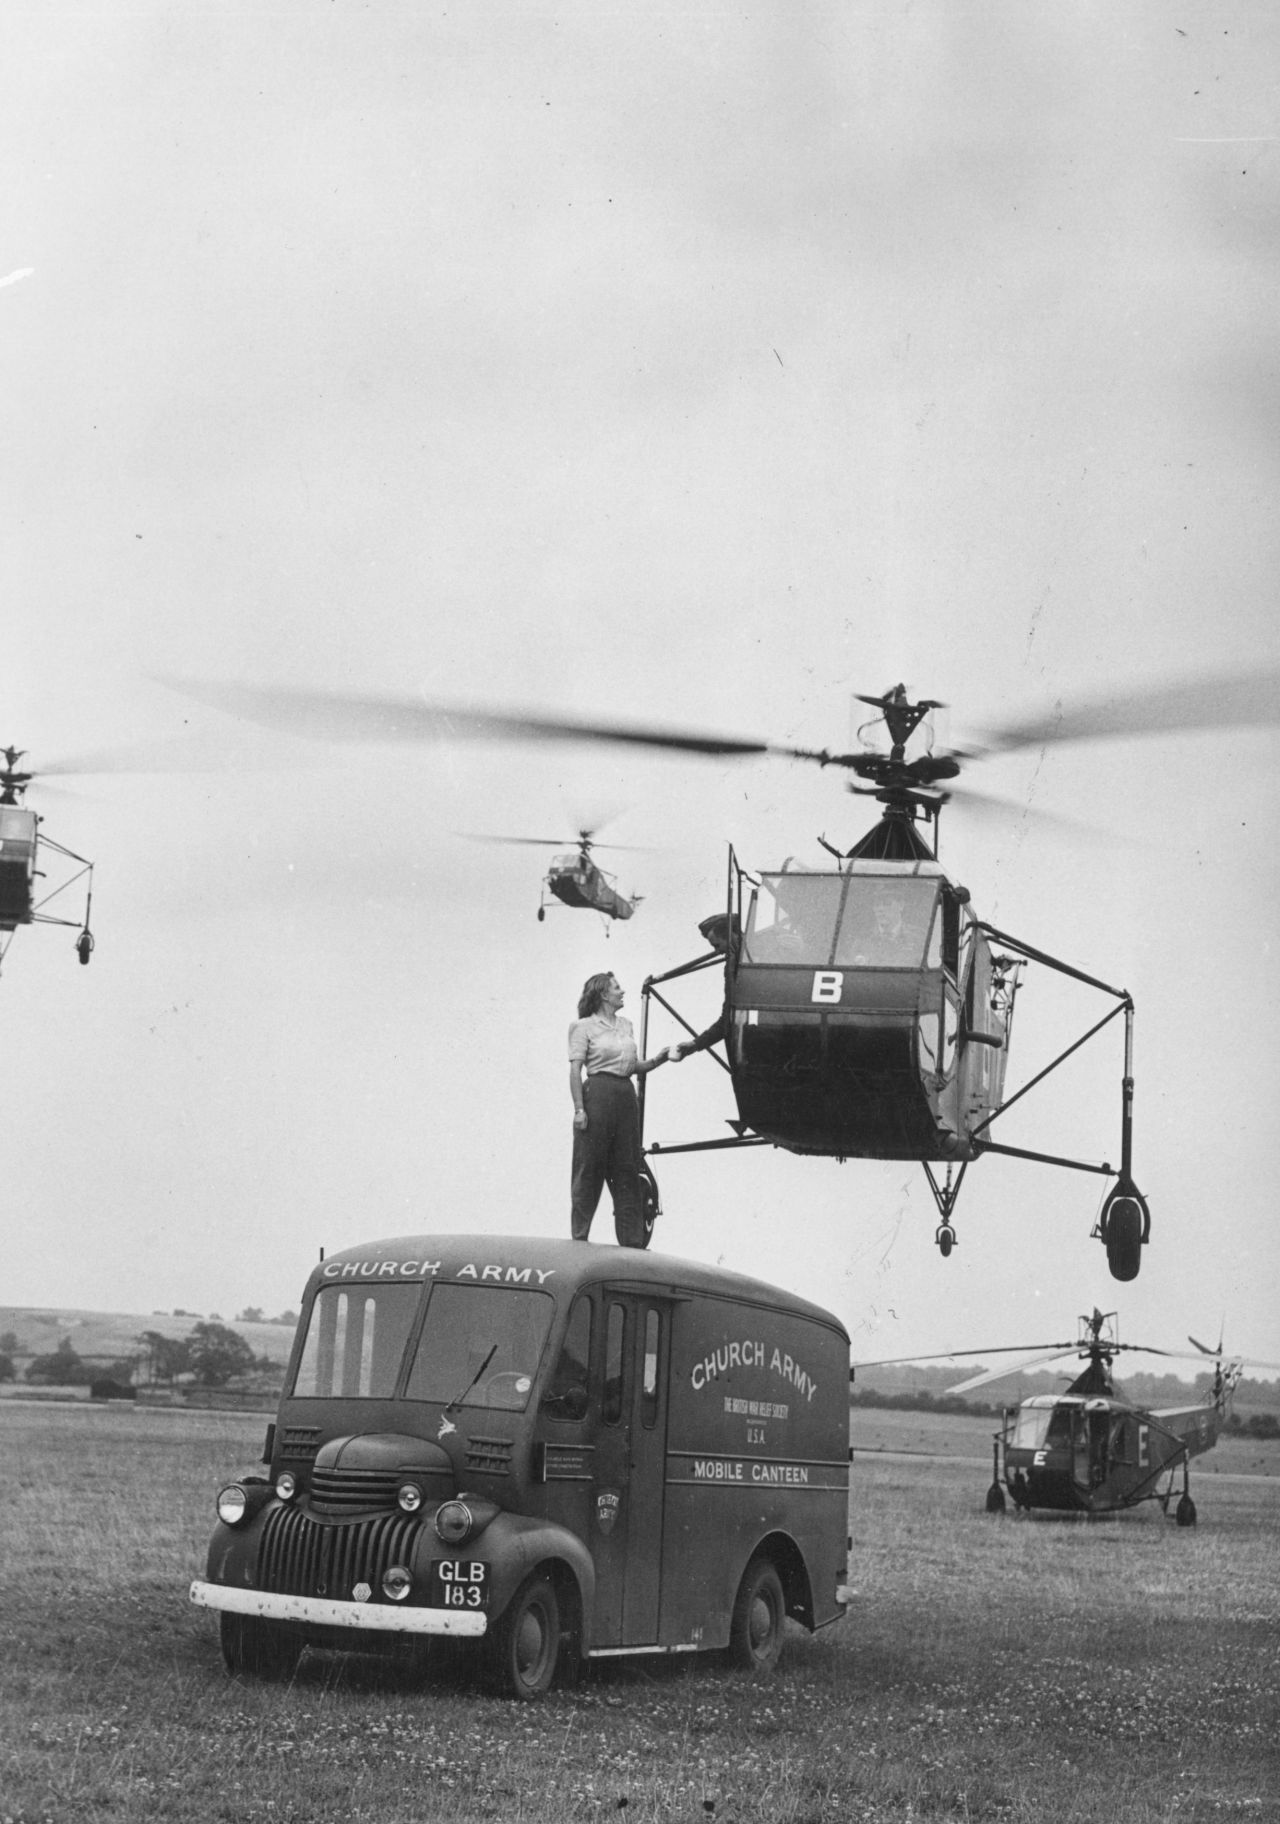 A Church Army canteen worker is seen here handing a cup of tea to the pilot of a Sikorsky R-4 helicopter hovering overhead at an RAF Helicopter School in Andover, England, in 1945. Though not an airplane, the R-4 was the world's first mass-produced helicopter.